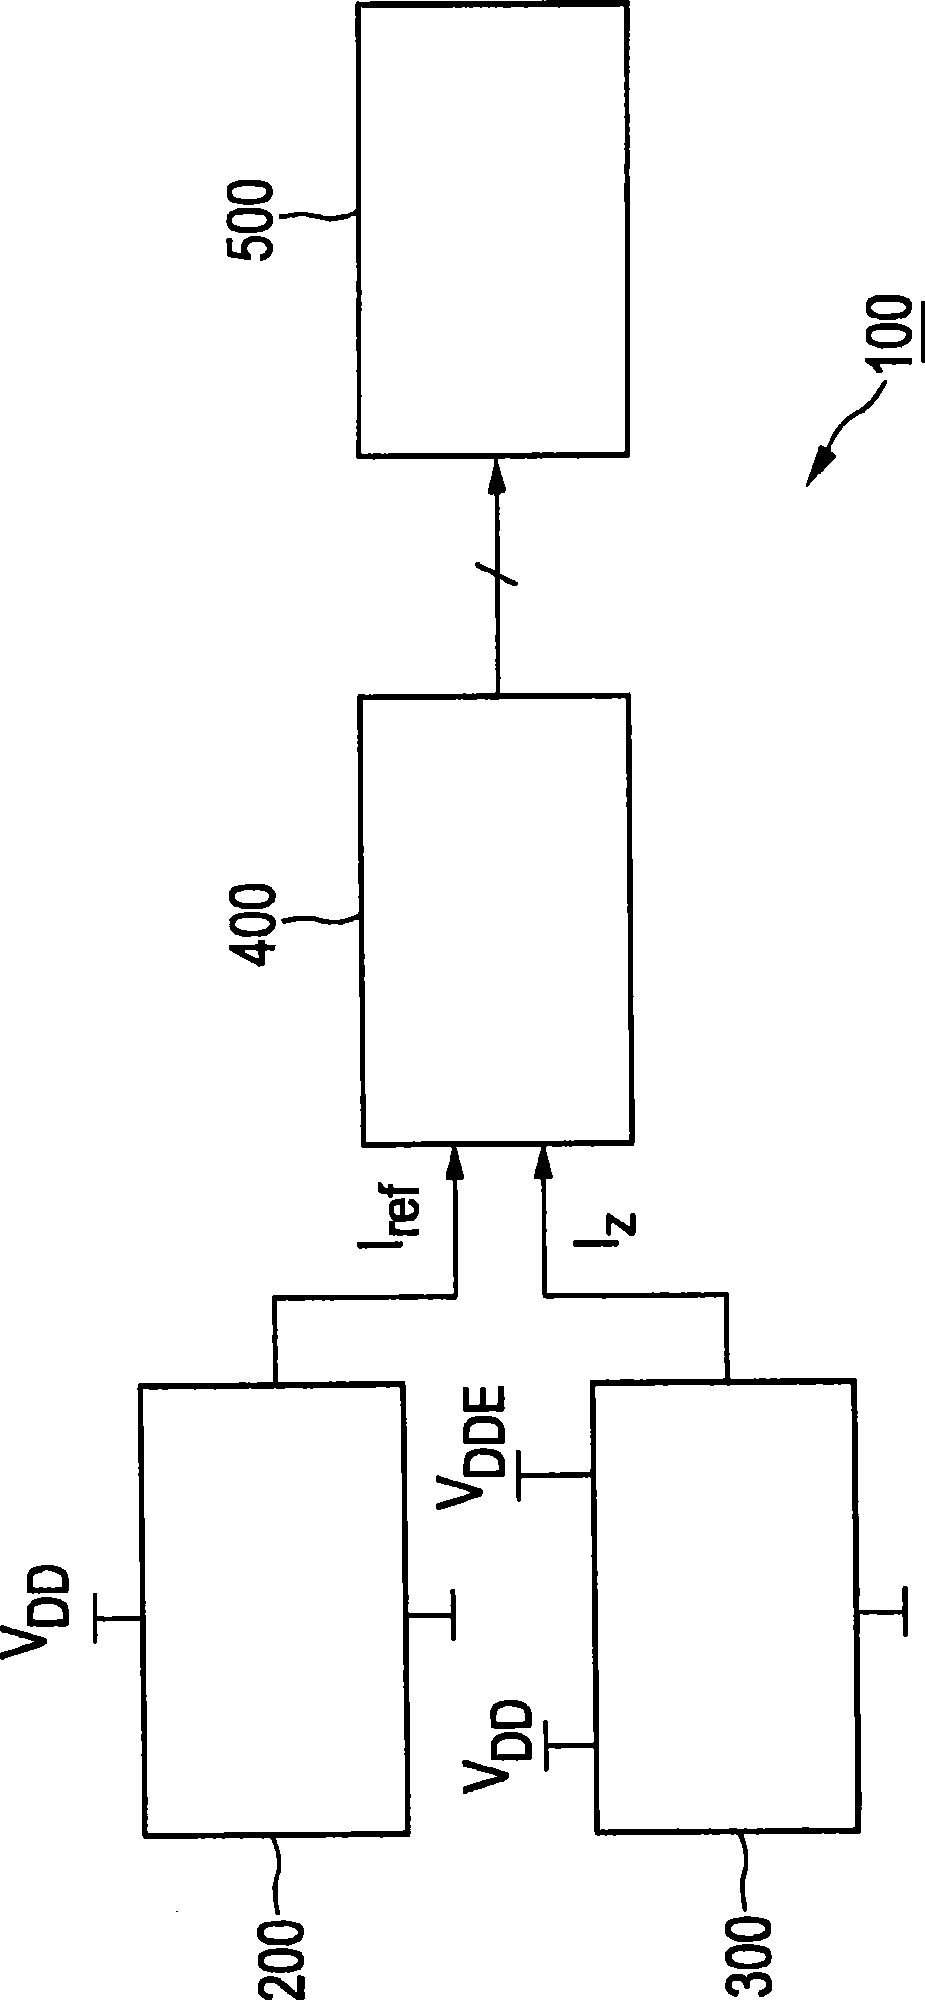 Very low power analog compensation circuit